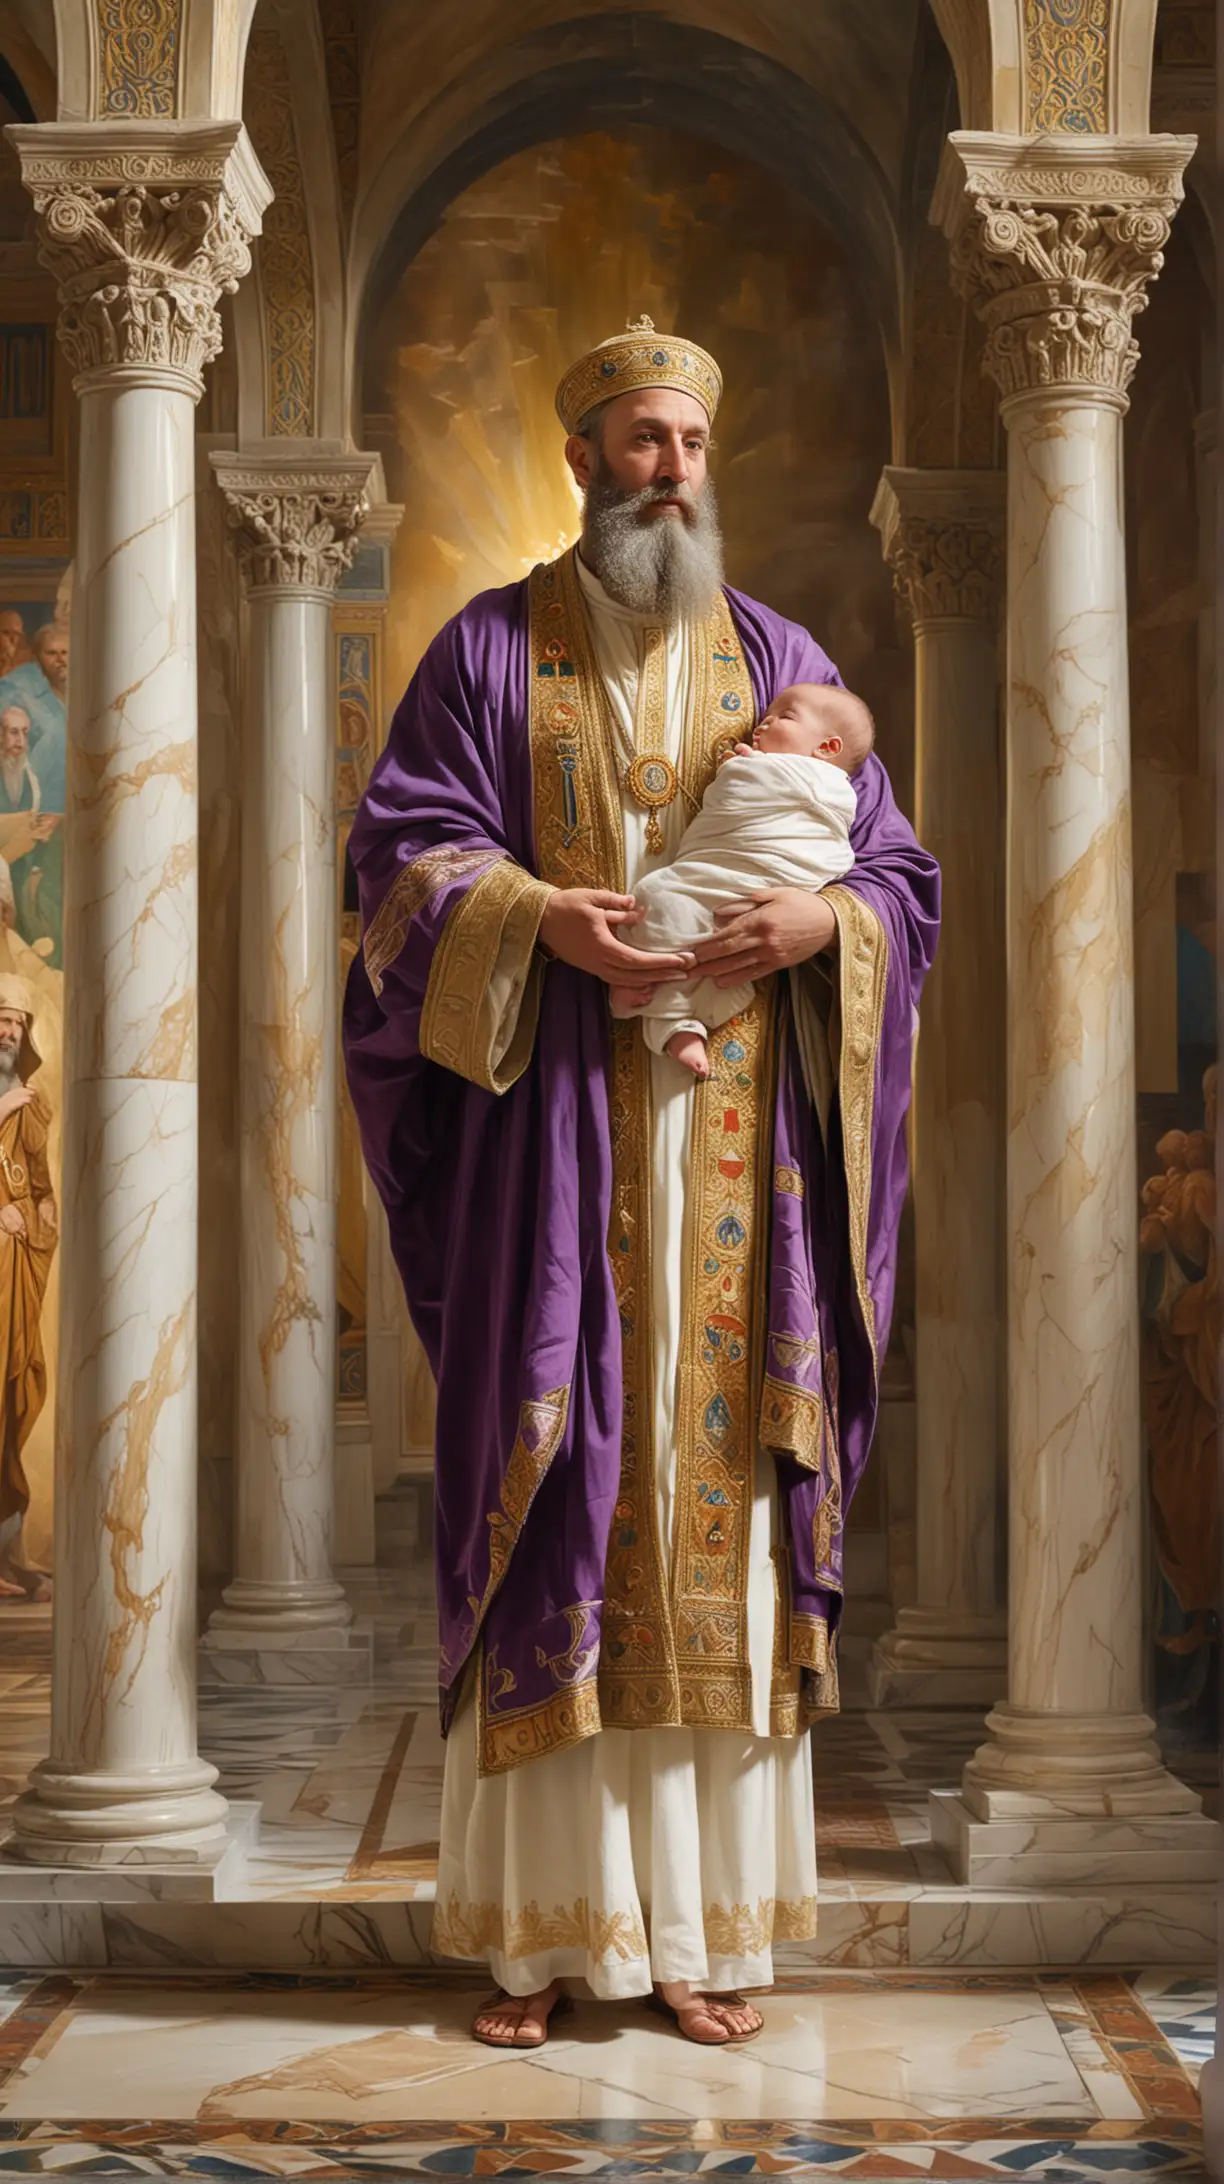 The painting depicts the Jewish high-priest Simeon dressed in full elaborate and colourful Jewish liturgical vestments carrying one naked baby in his arms in the temple. The scene is set within the temple, suggested by the arched stone doorway and the polished marble walls and columns.

Central Figure
The white long-bearded Jewish high-priest Simeon: We are seeing the Jewish High-priest Simeon dressed in full rich Jewish liturgy vestments in very bright colours purple and beige, from the left side.  He is holding the naked baby in his arms.

Additional Details: 
The Temple Setting: The temple walls and columns are in polished white marble.  There is a green curtain hanging from the columns in the background The saturated tones of the painting and the play of light and shadow create a sense of excitement.
Symbolism:  The cloth in which the Jewish High-priest Simeon is holding the naked baby Jesus is gold. The light is coming in from the right of the image.
Overall Impression:
The painting captures the emotional intensity and spiritual significance of the subject The expression of the figure, the symbolism, and the setting all contribute to a powerful depiction of this pivotal event.